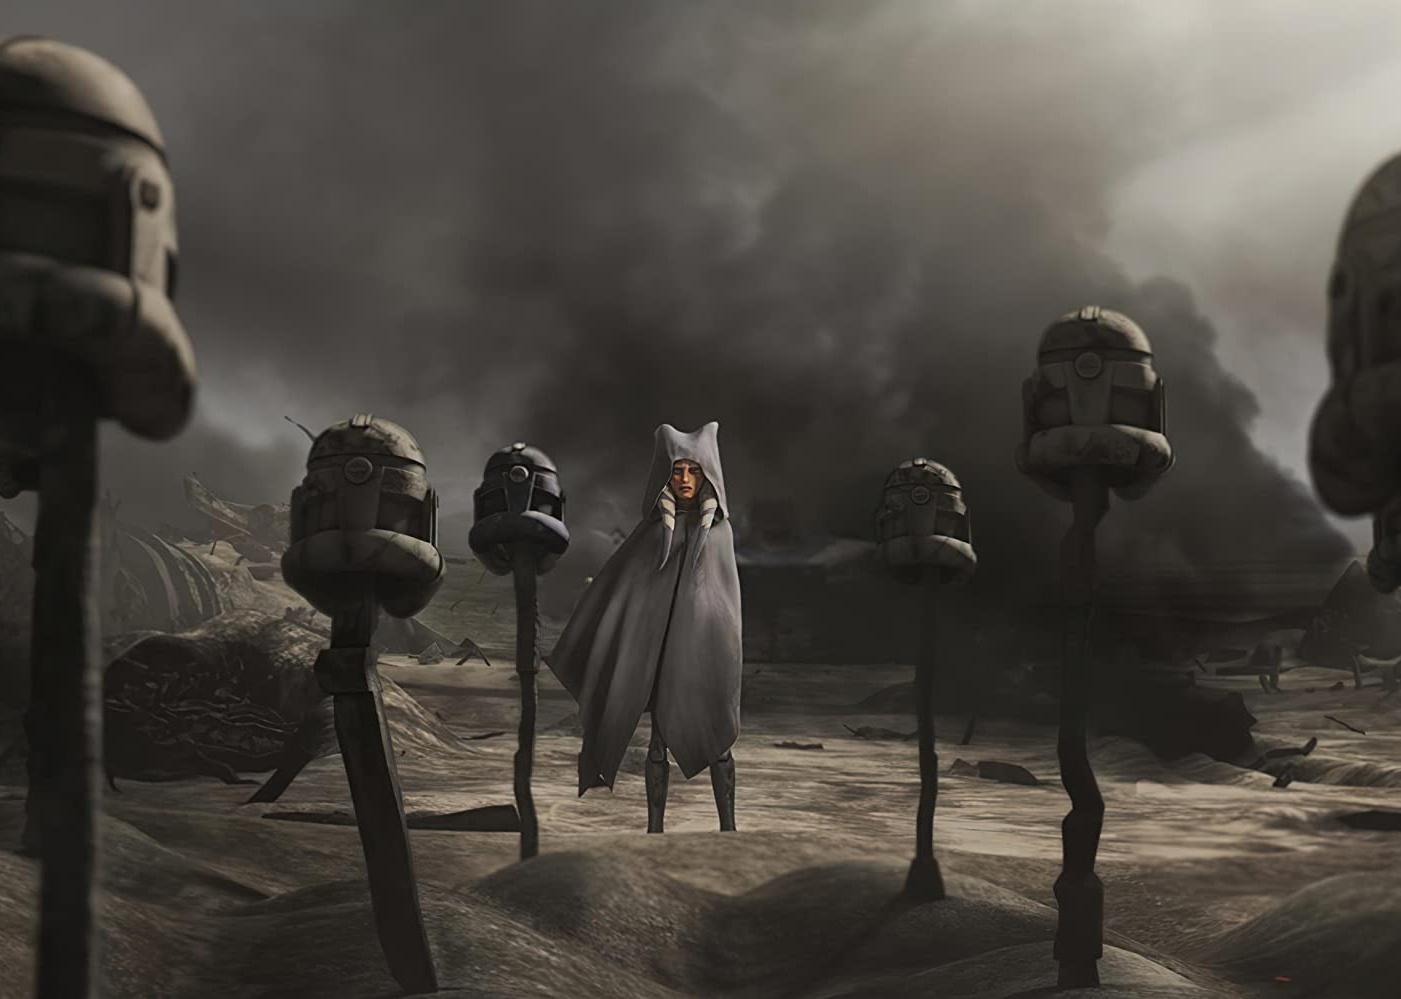 An animation of a character in a gray cloak looking at helmets on sticks.